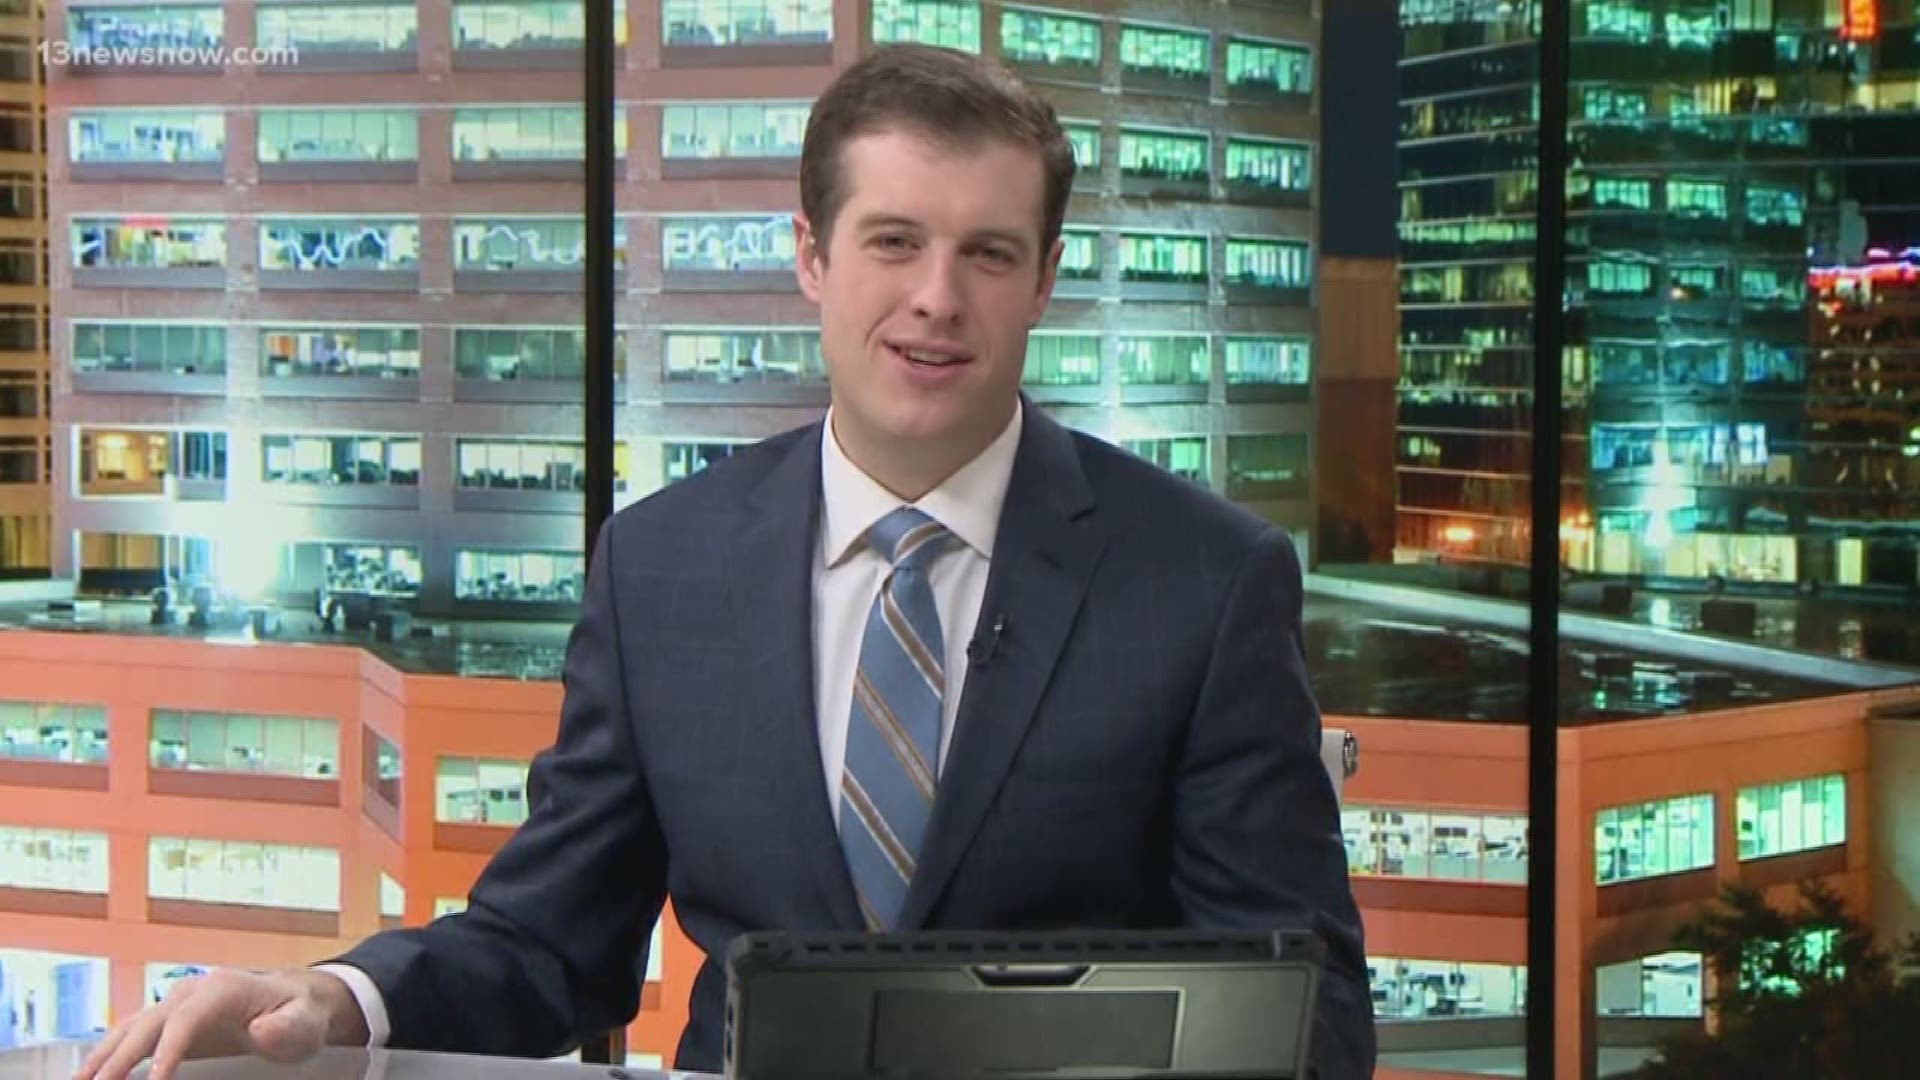 13News Now Top Headlines at Daybreak with Dan Kennedy for December 14.